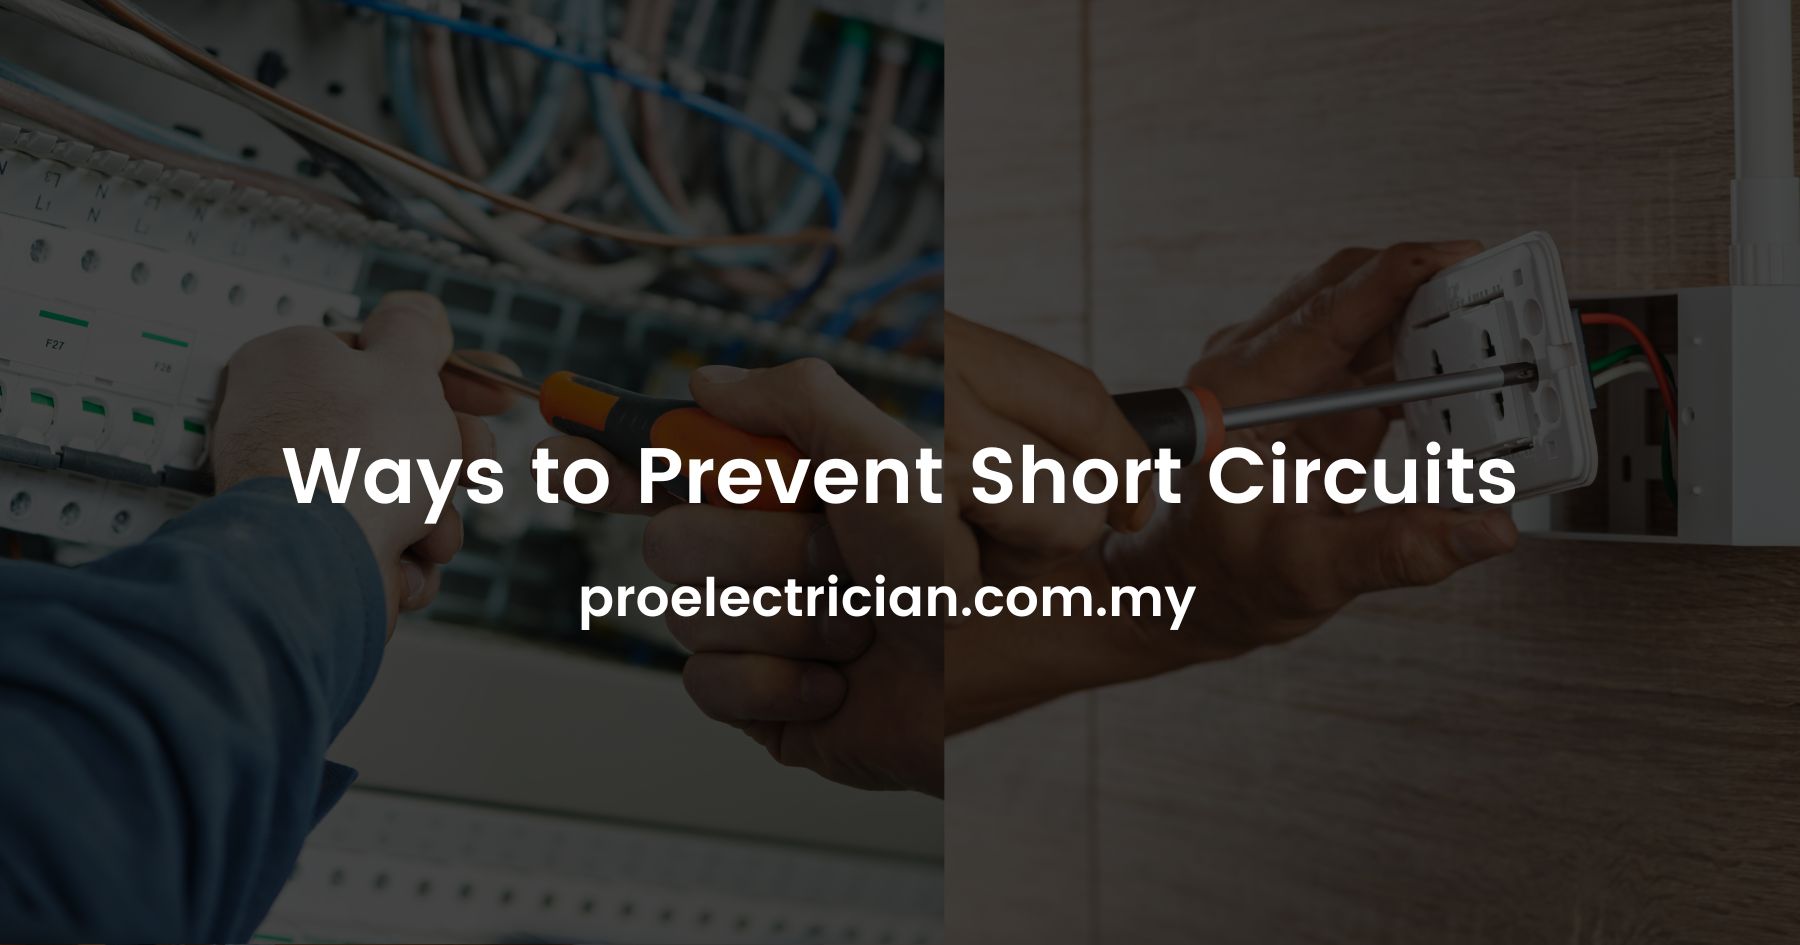 Ways to Prevent Short Circuits